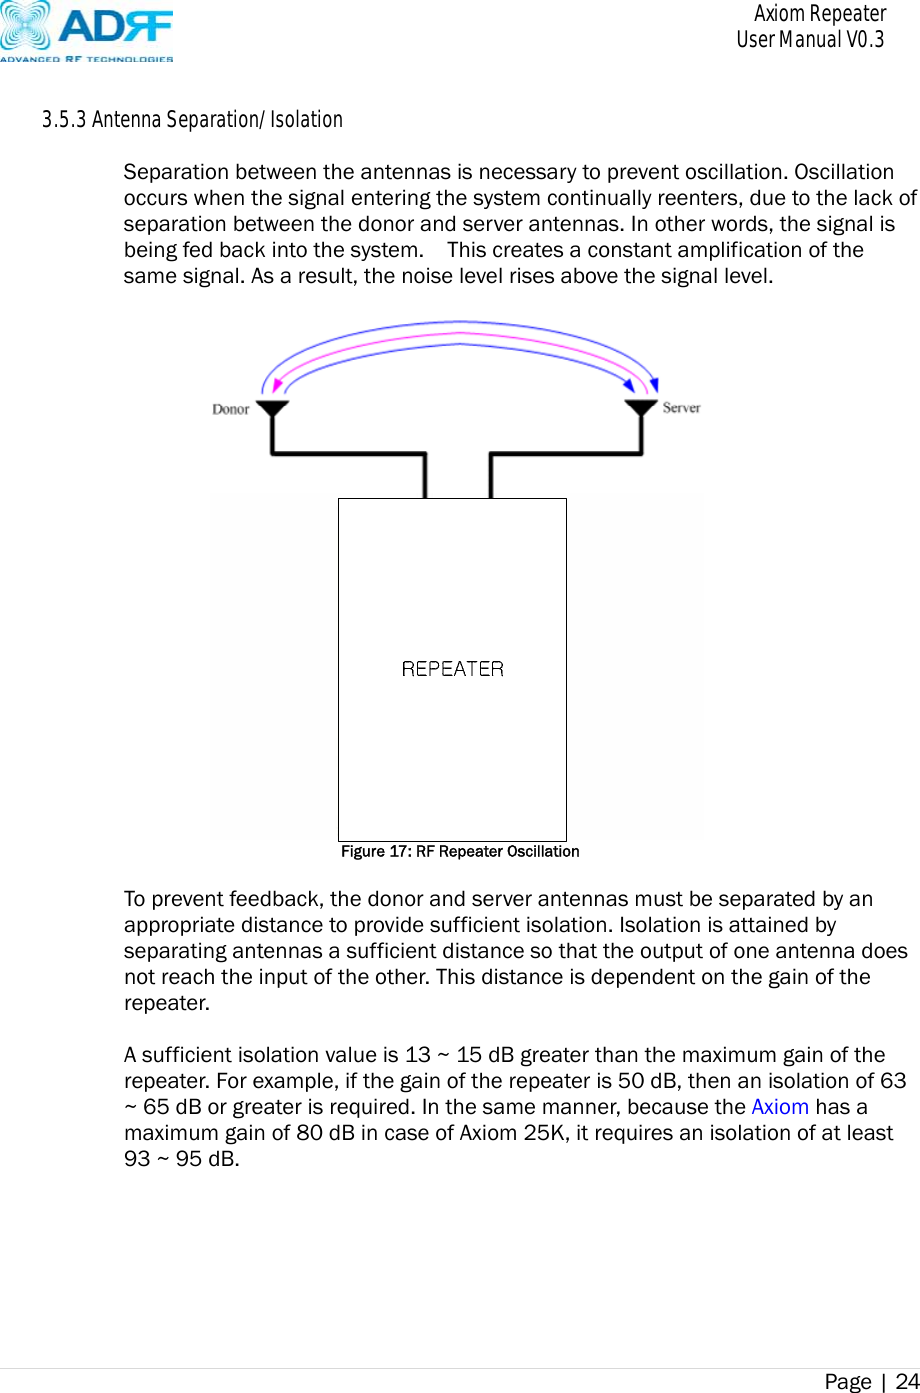       Axiom Repeater     User Manual V0.3 Page | 24     3.5.3 Antenna Separation/Isolation  Separation between the antennas is necessary to prevent oscillation. Oscillation occurs when the signal entering the system continually reenters, due to the lack of separation between the donor and server antennas. In other words, the signal is being fed back into the system.    This creates a constant amplification of the same signal. As a result, the noise level rises above the signal level.   Figure 17: RF Repeater Oscillation  To prevent feedback, the donor and server antennas must be separated by an appropriate distance to provide sufficient isolation. Isolation is attained by separating antennas a sufficient distance so that the output of one antenna does not reach the input of the other. This distance is dependent on the gain of the repeater.   A sufficient isolation value is 13 ~ 15 dB greater than the maximum gain of the repeater. For example, if the gain of the repeater is 50 dB, then an isolation of 63 ~ 65 dB or greater is required. In the same manner, because the Axiom has a maximum gain of 80 dB in case of Axiom 25K, it requires an isolation of at least 93 ~ 95 dB.  